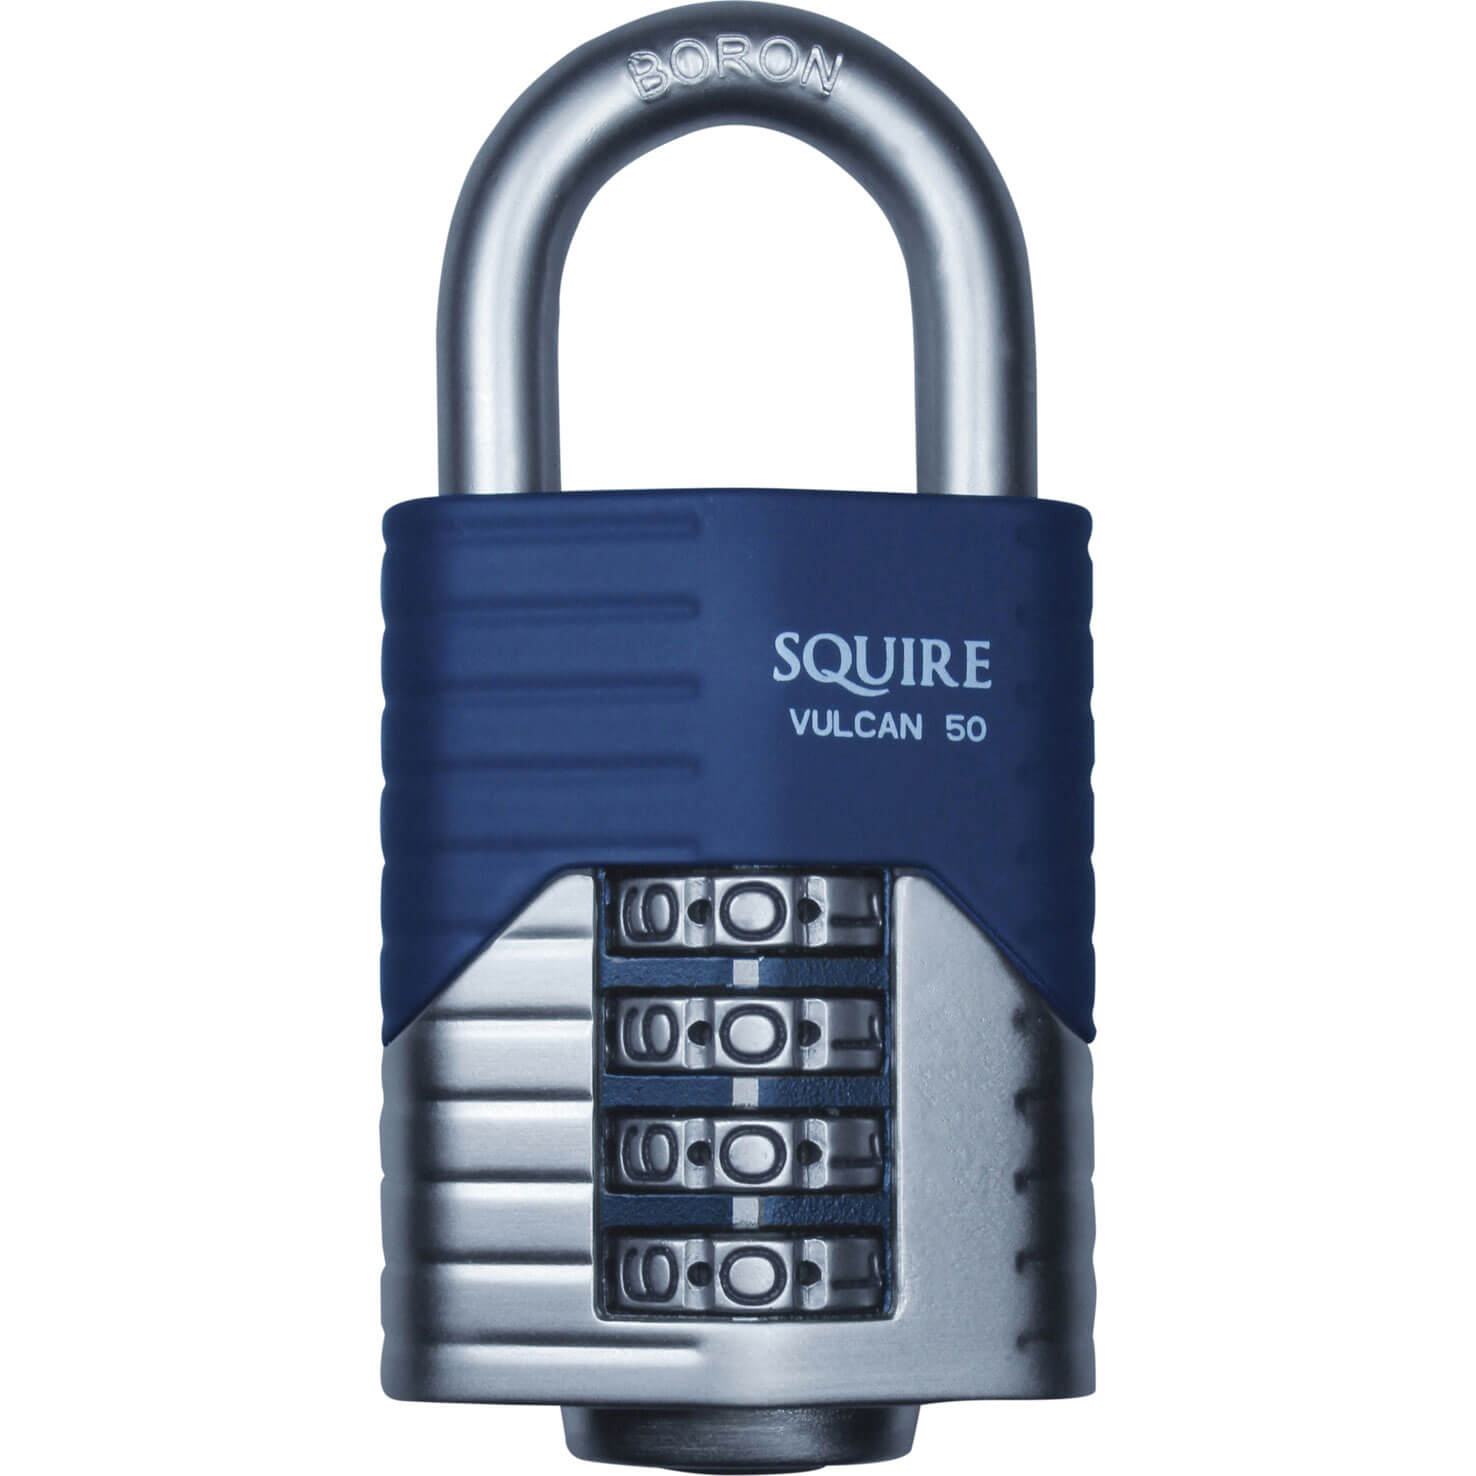 Image of Henry Squire Vulcan Boron Shackle Combination Padlock 40mm Standard